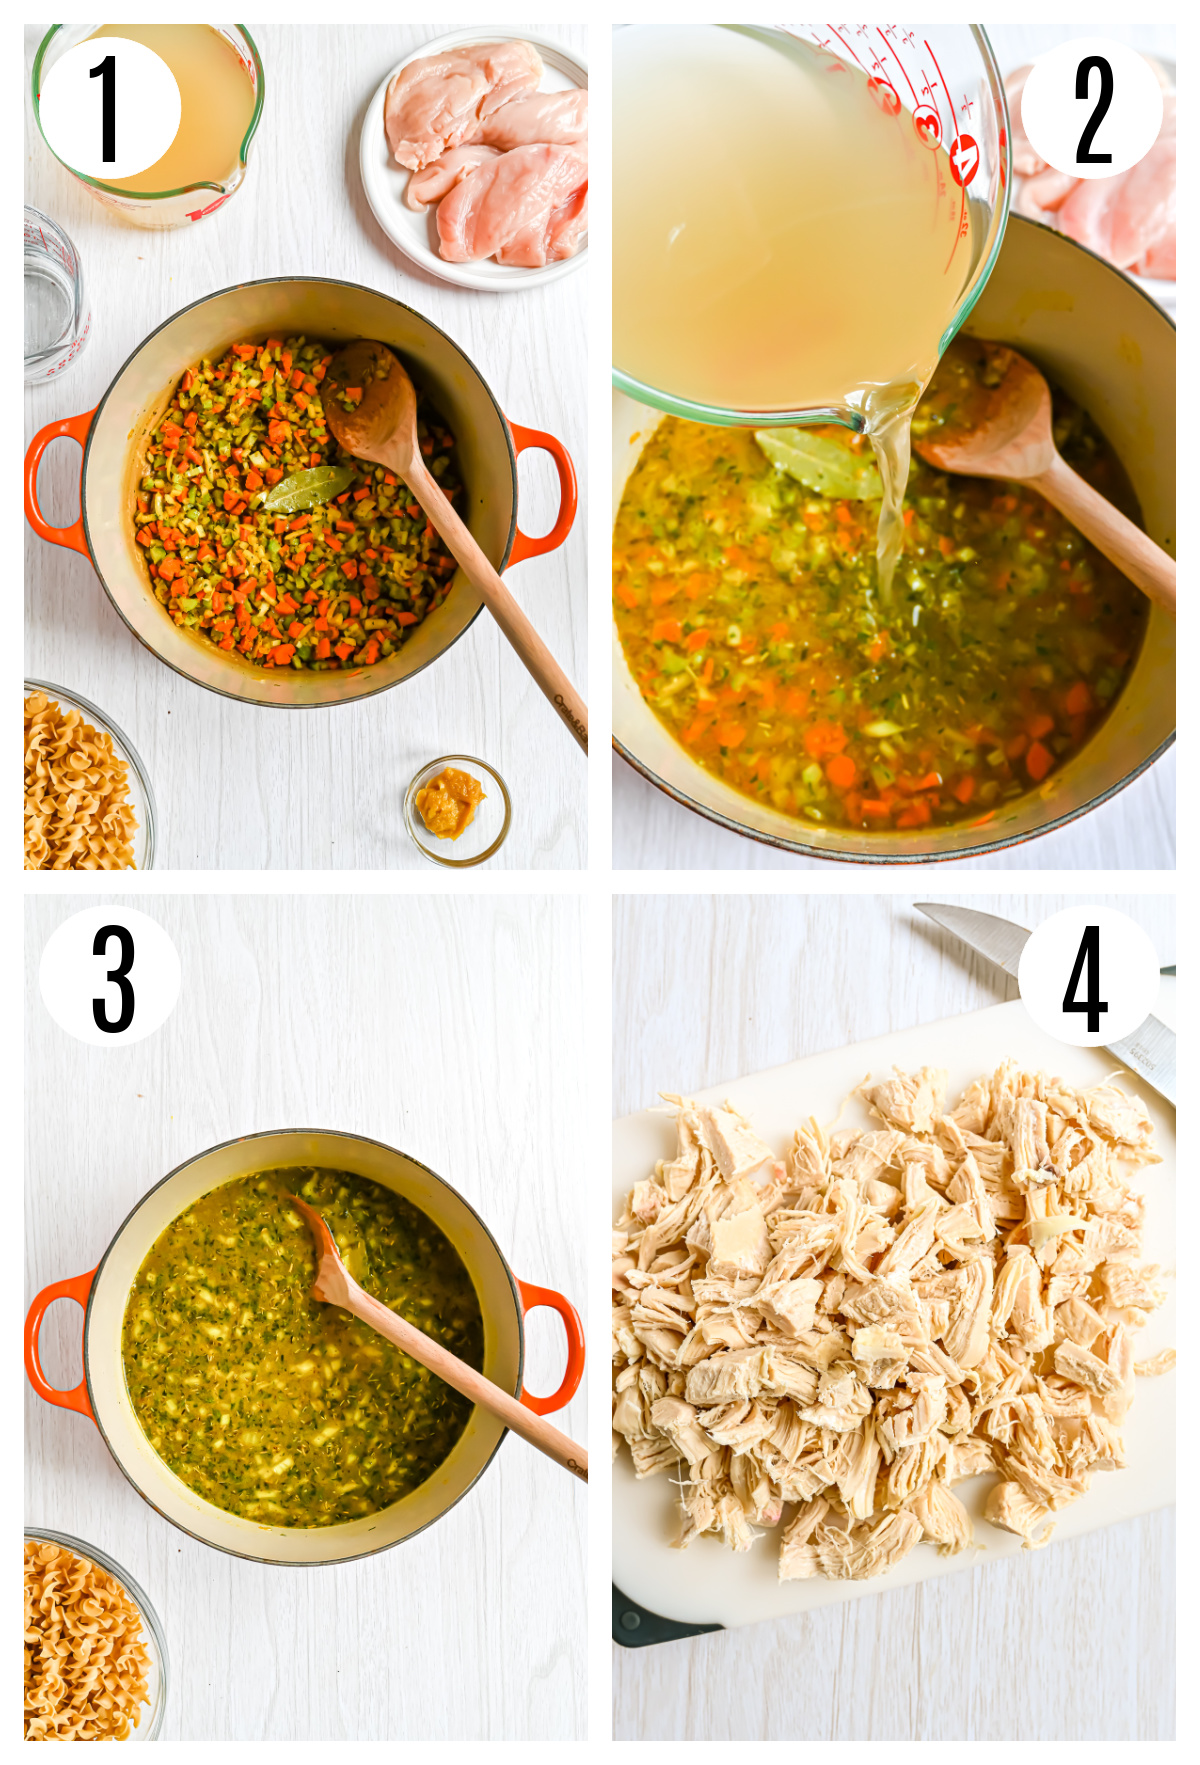 The first four steps to making the Panera Chicken Noodle Soup including: sauteing the vegetables, adding the chicken broth and water and cooking the chicken, and shredding the chicken.